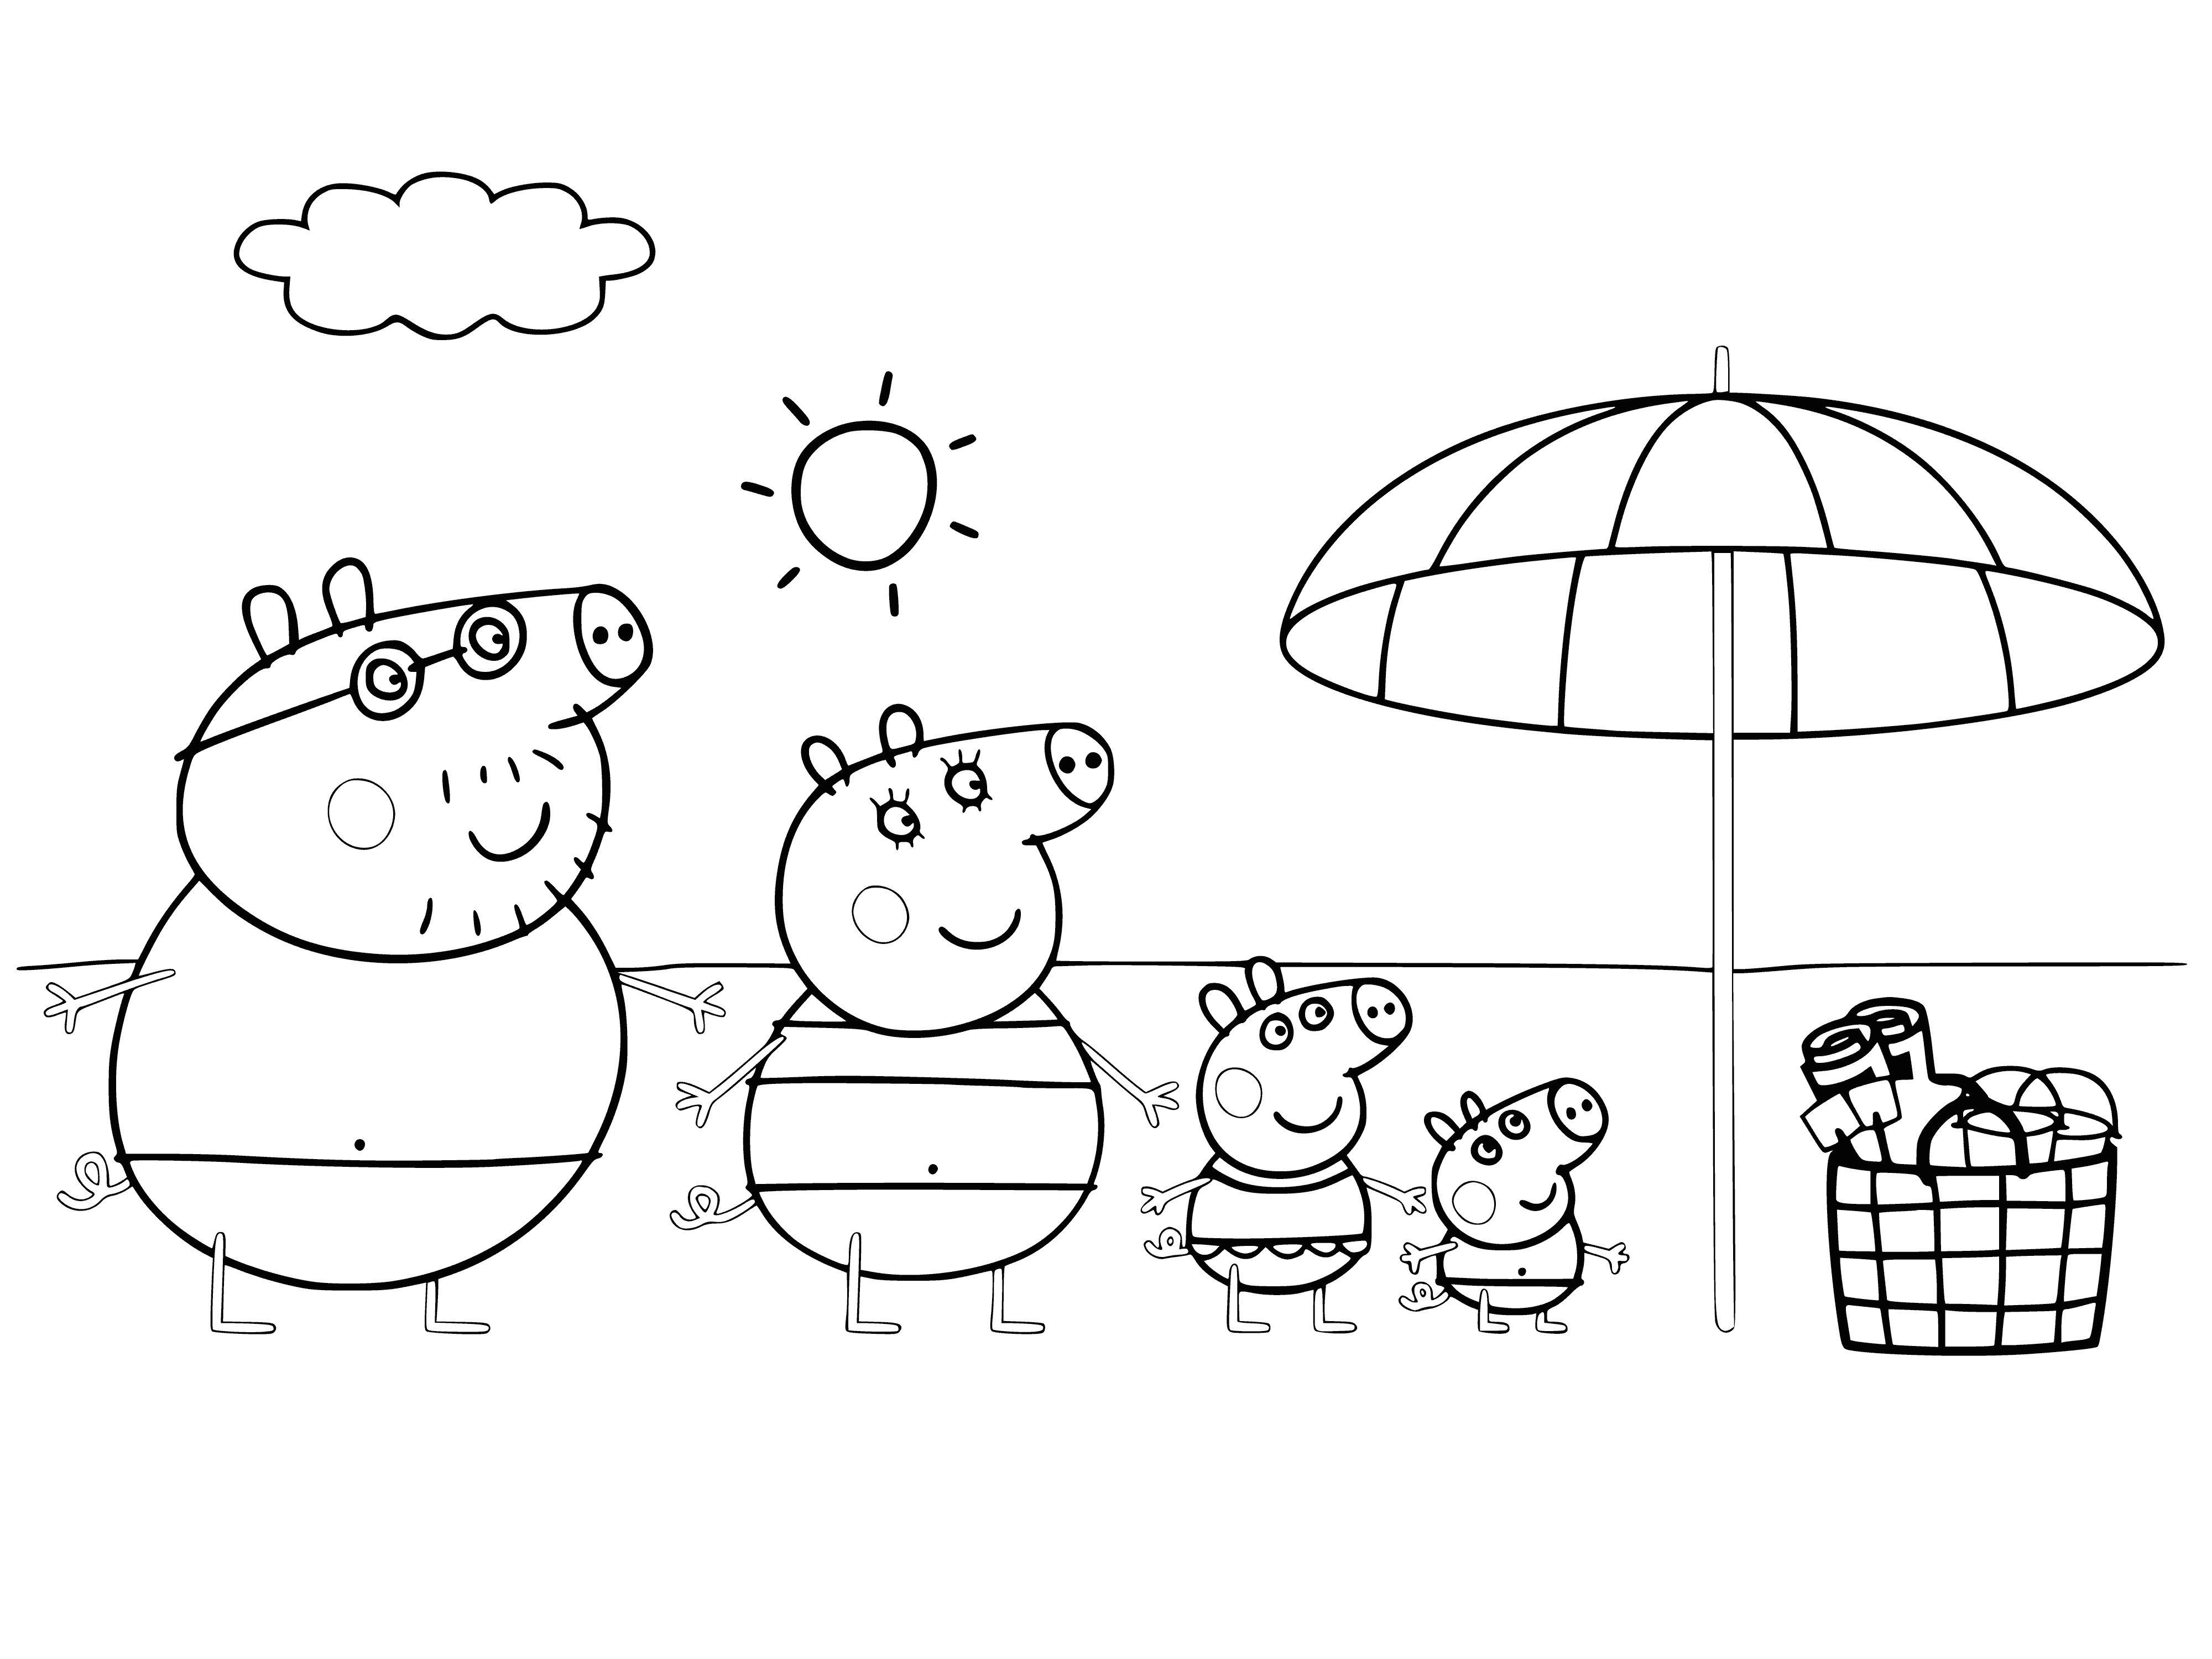 Family on the beach coloring page